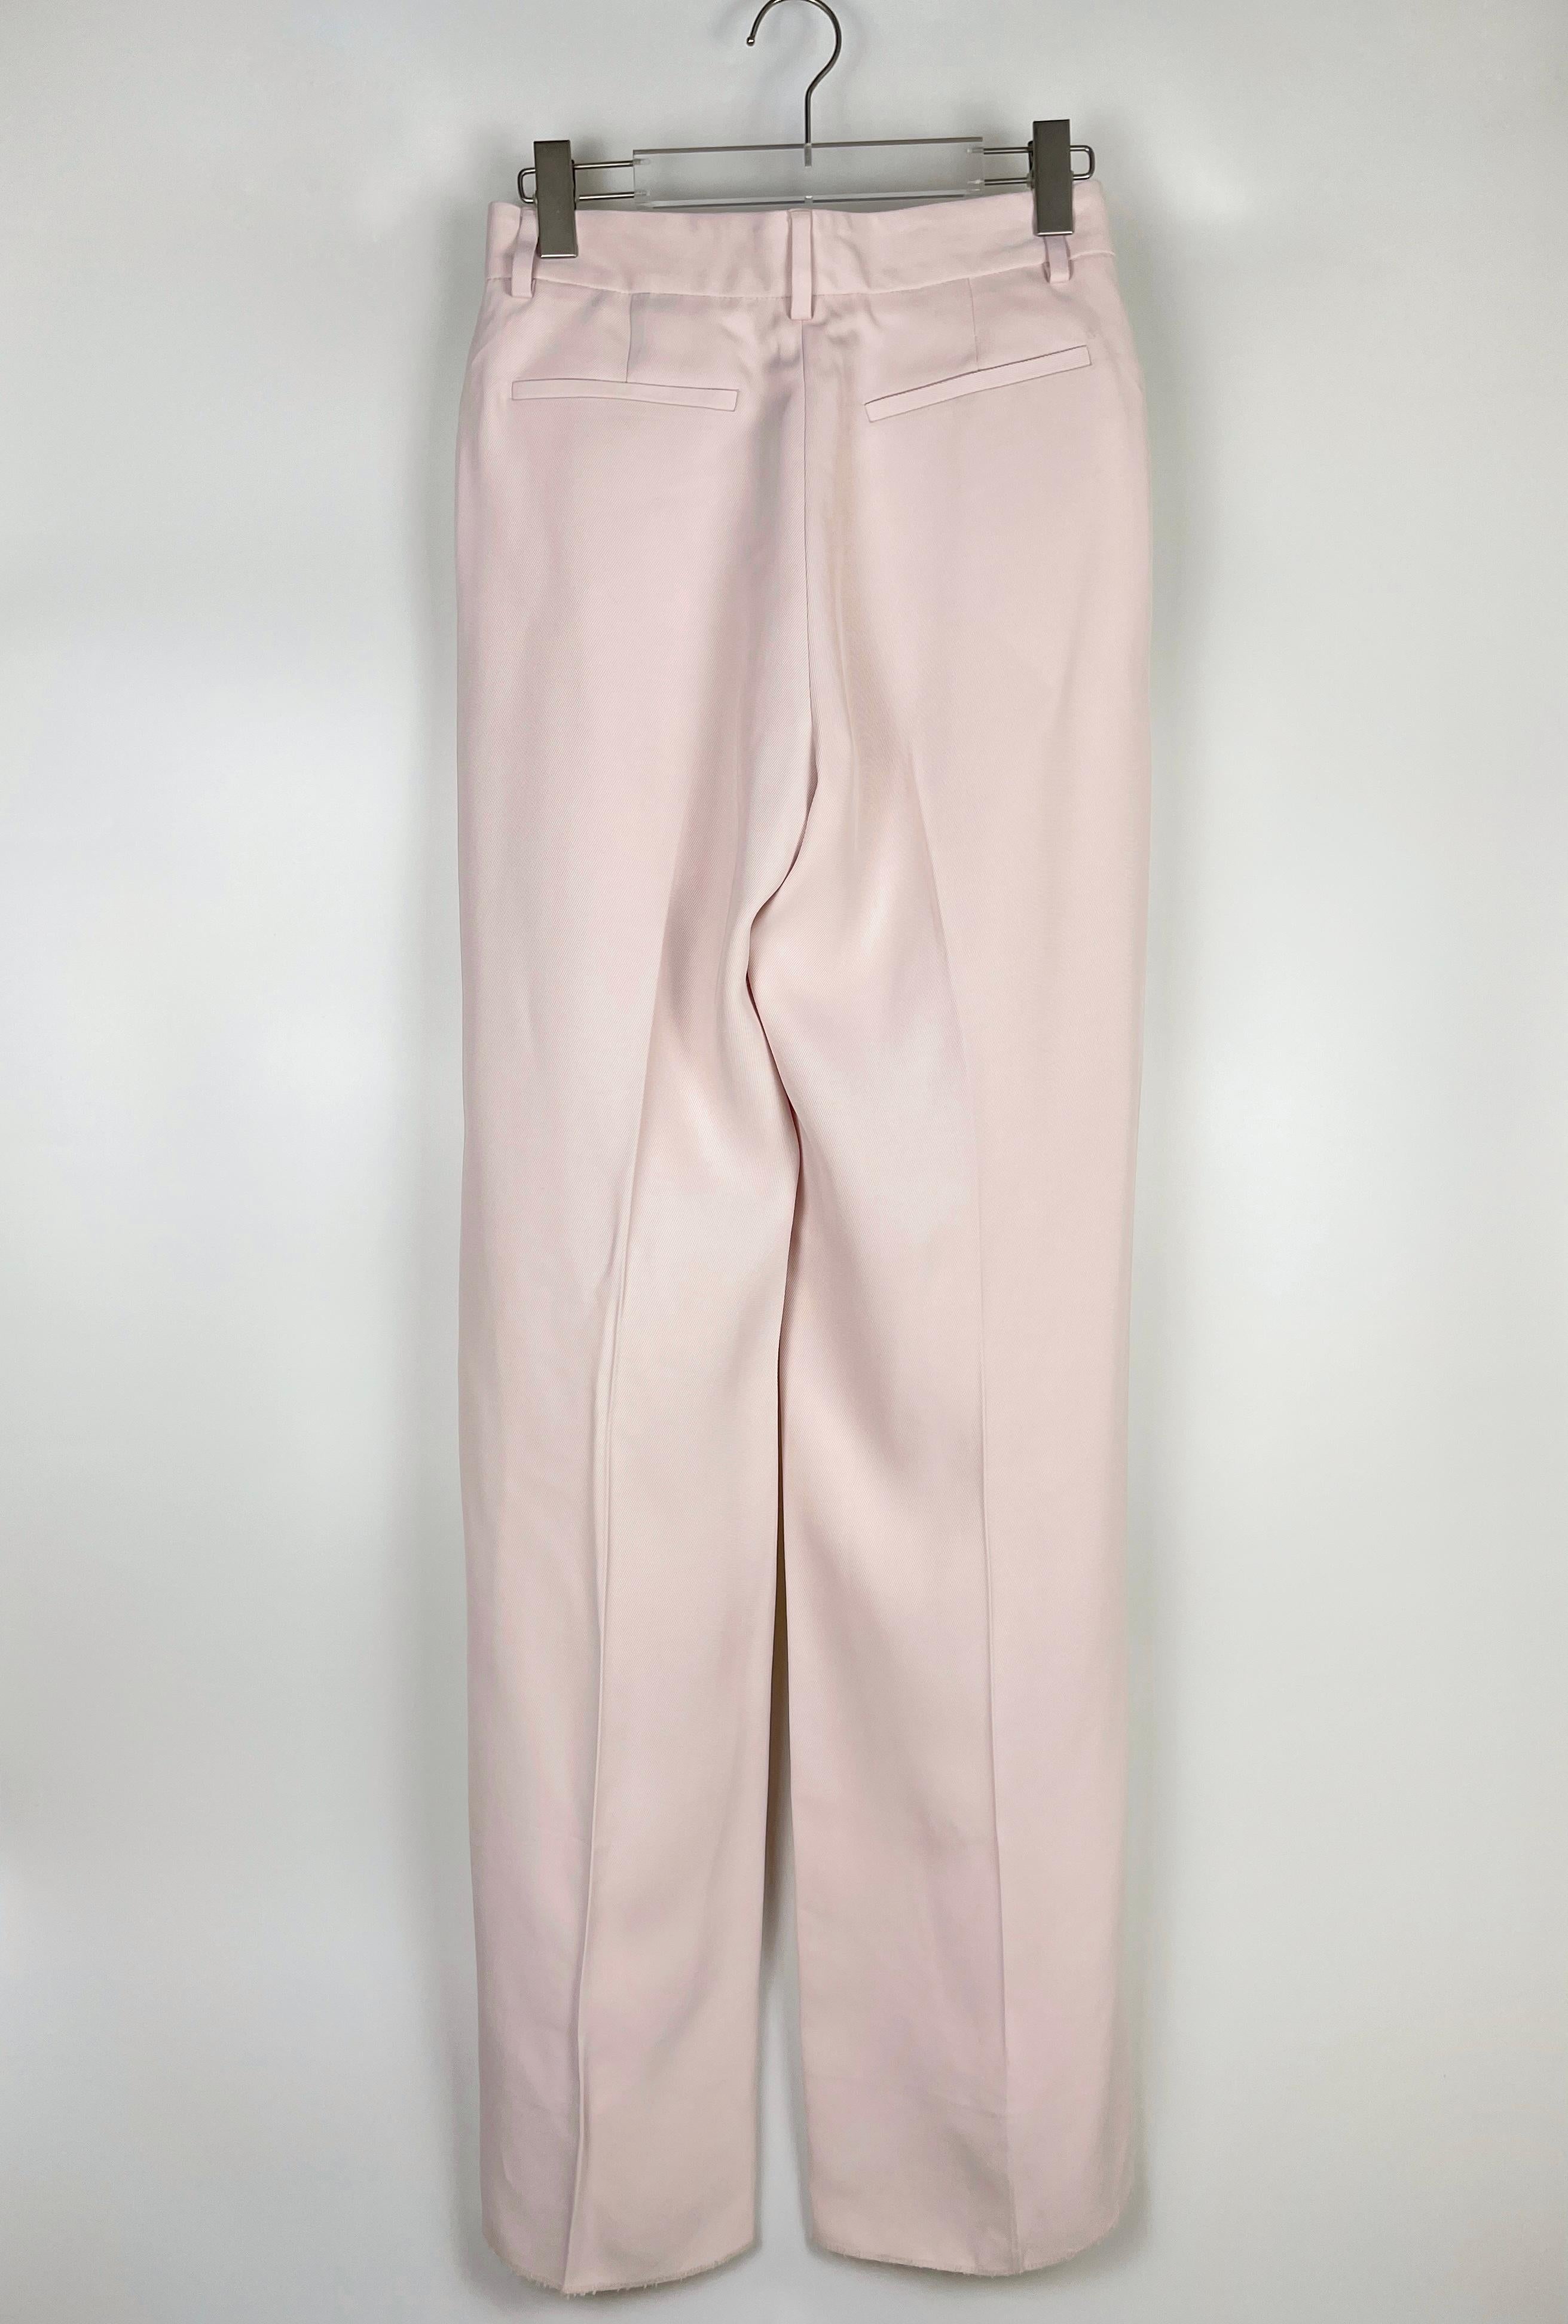 Amiri S/S2023 Double Pleated Trouses in Pink For Sale 4